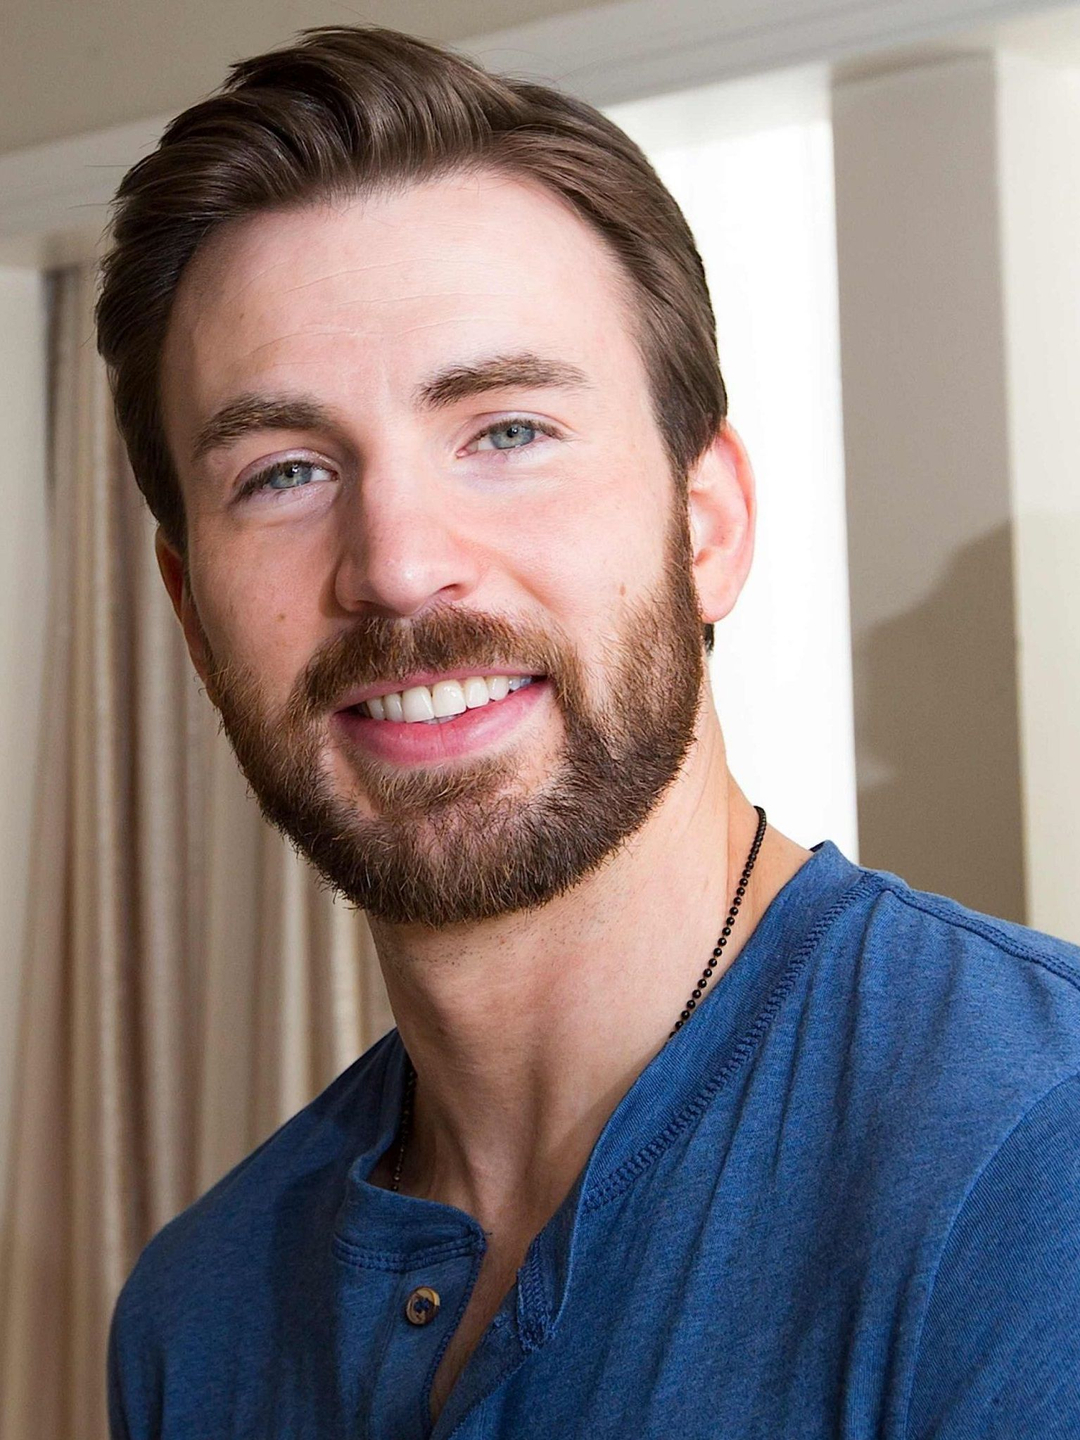 Chris Evans how did he became famous